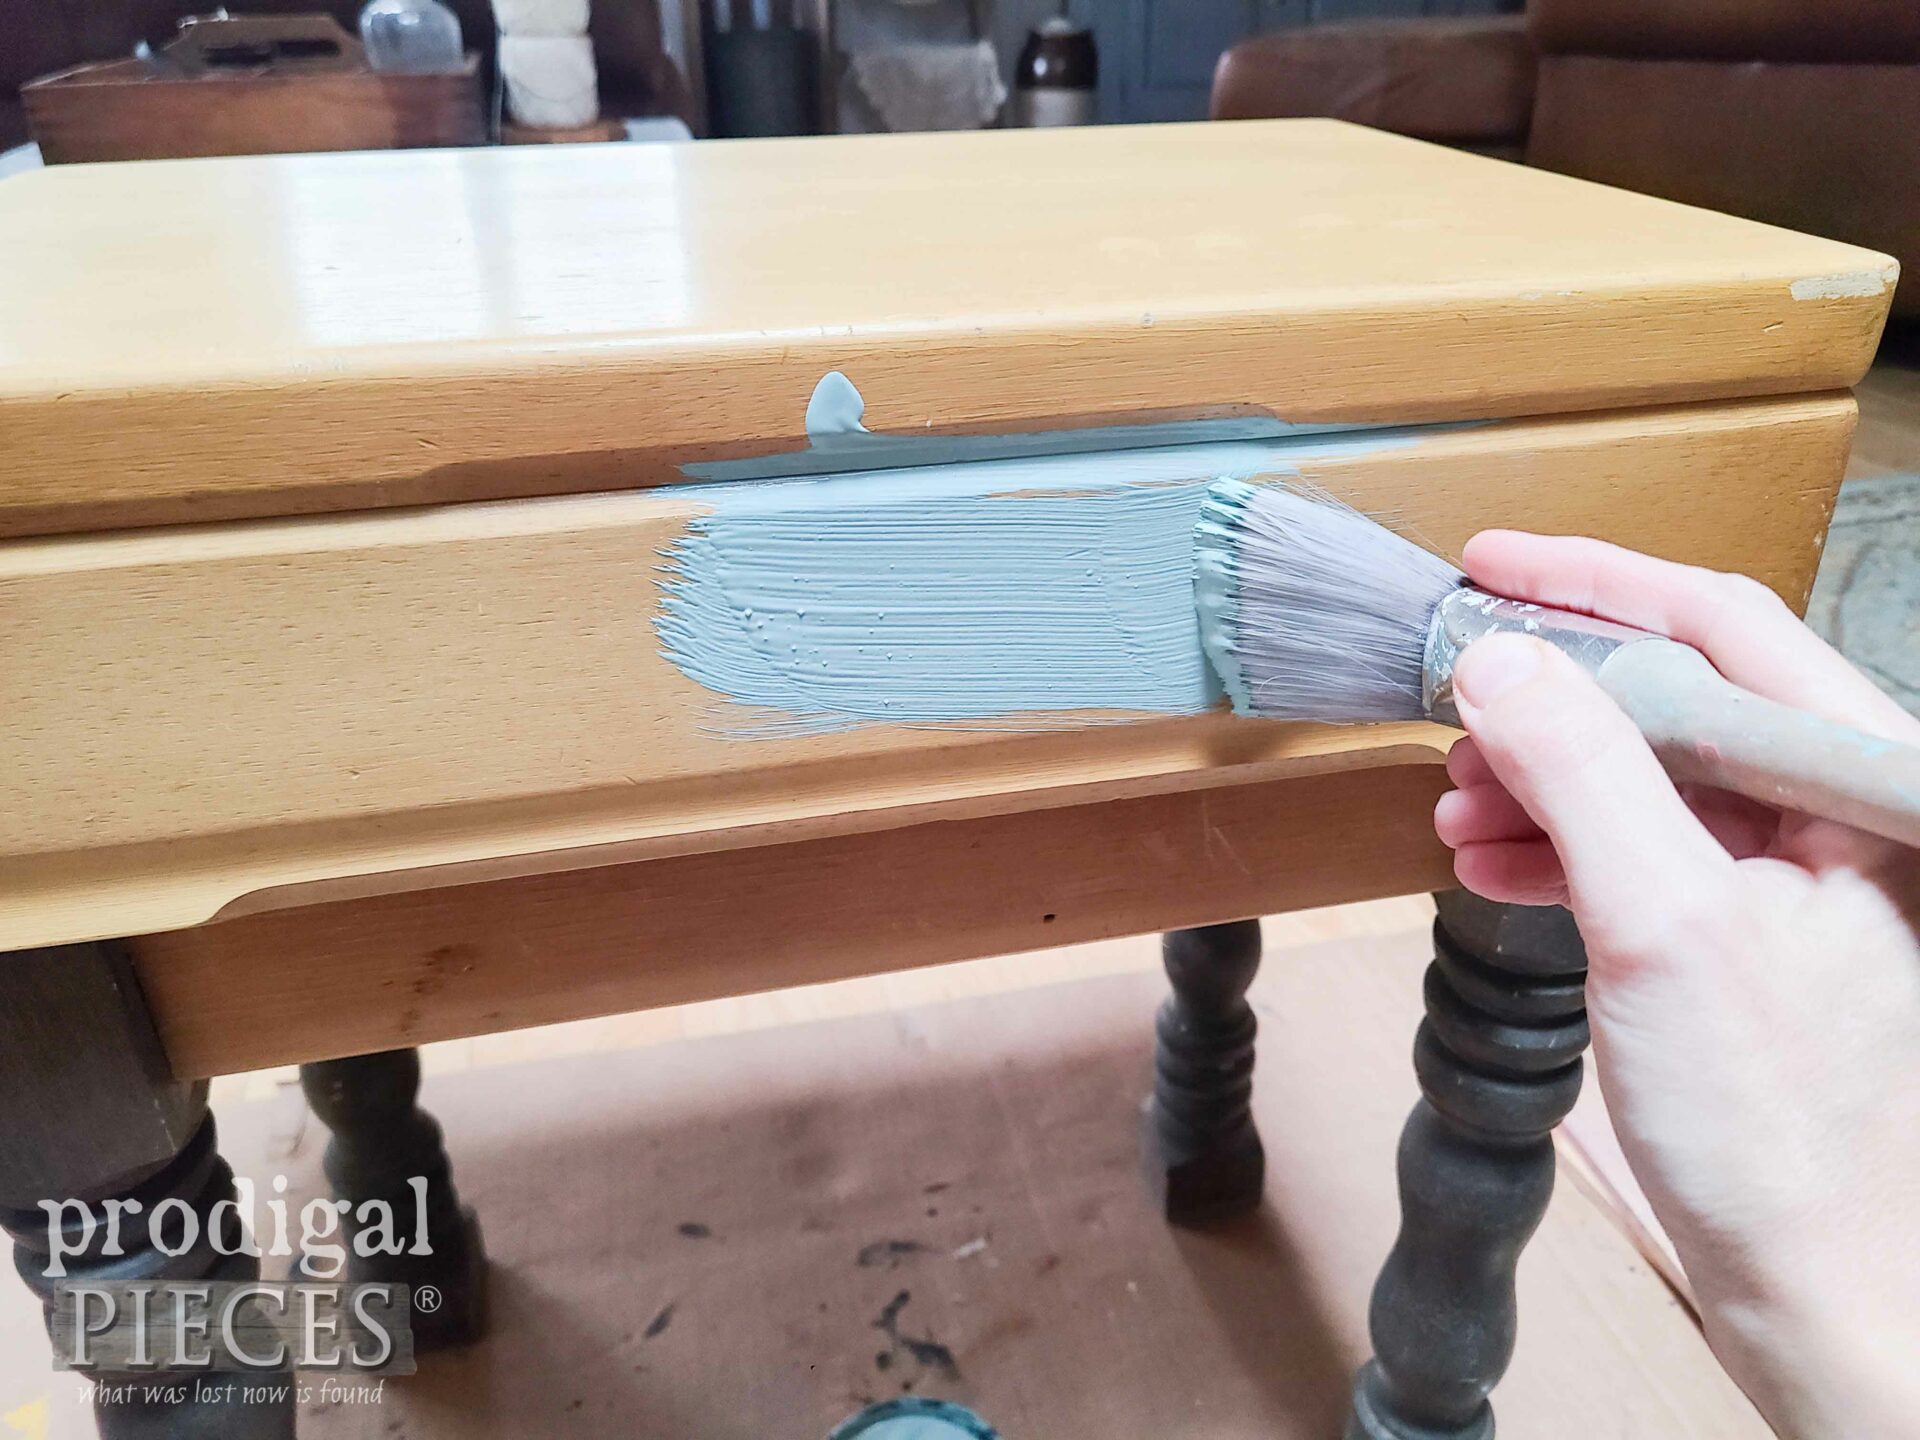 Painting DIY Reclaimed Silverware Chest Table | prodigalpieces.com #prodigalpieces